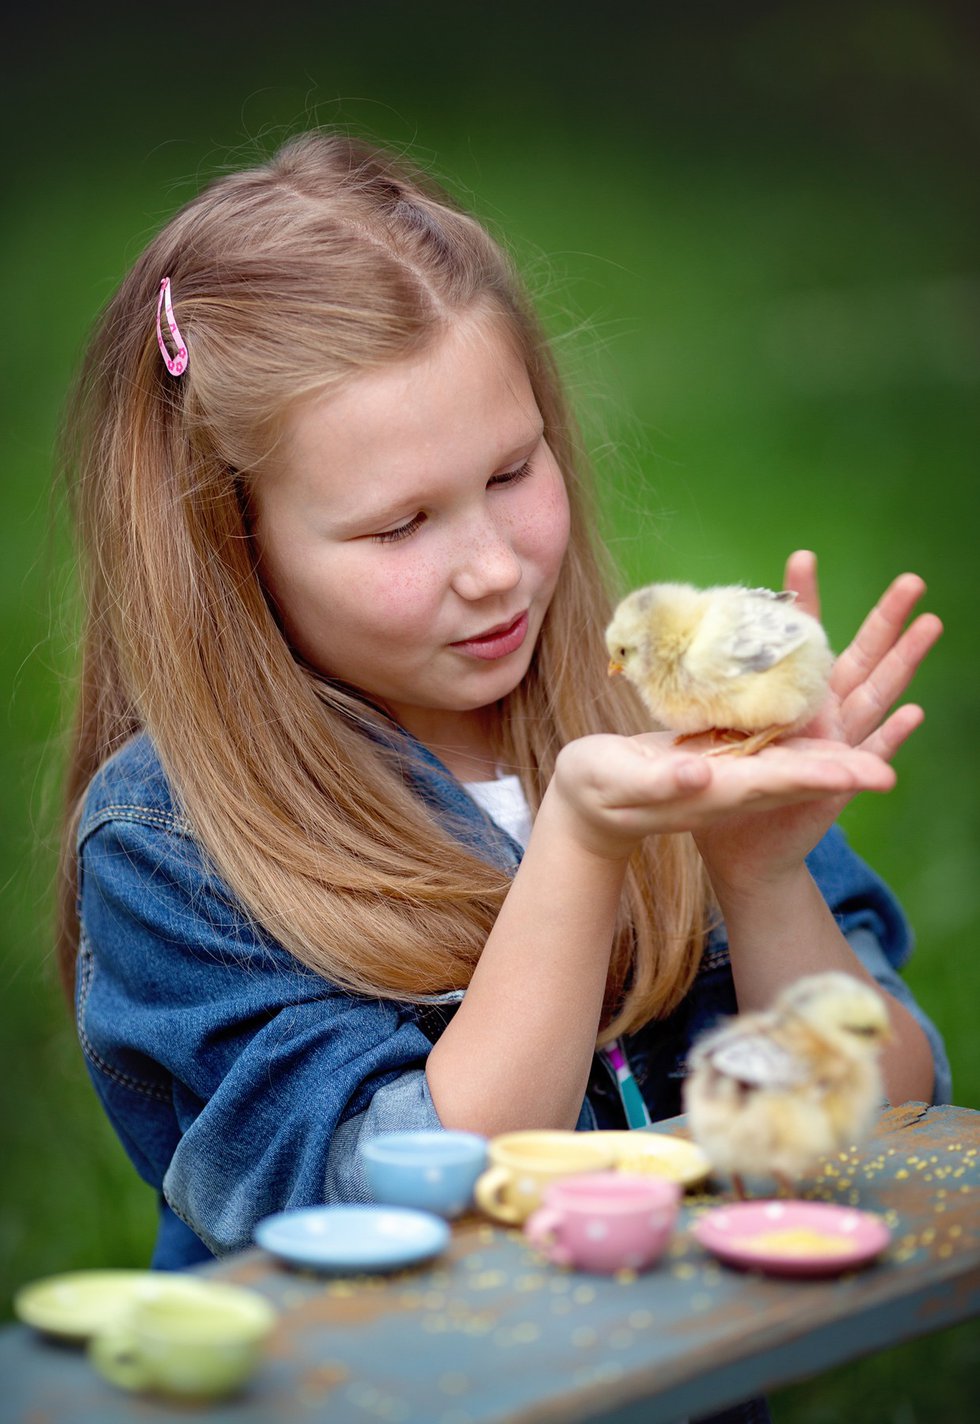 imagesevents27432girl-with-chick-jpg.jpe